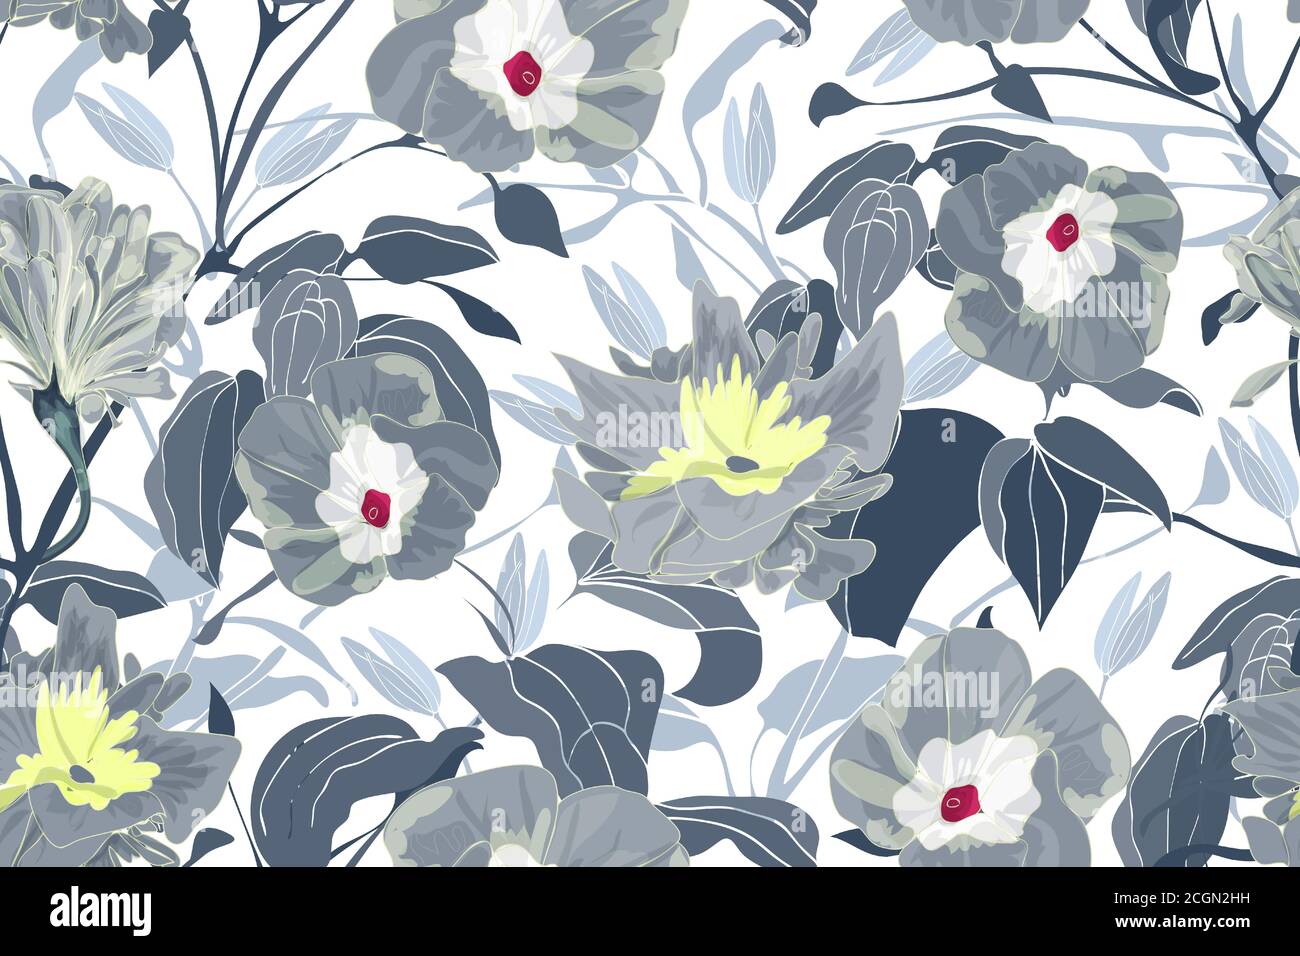 Art floral vector seamless pattern. Grey morning glory flowers. Stock Vector